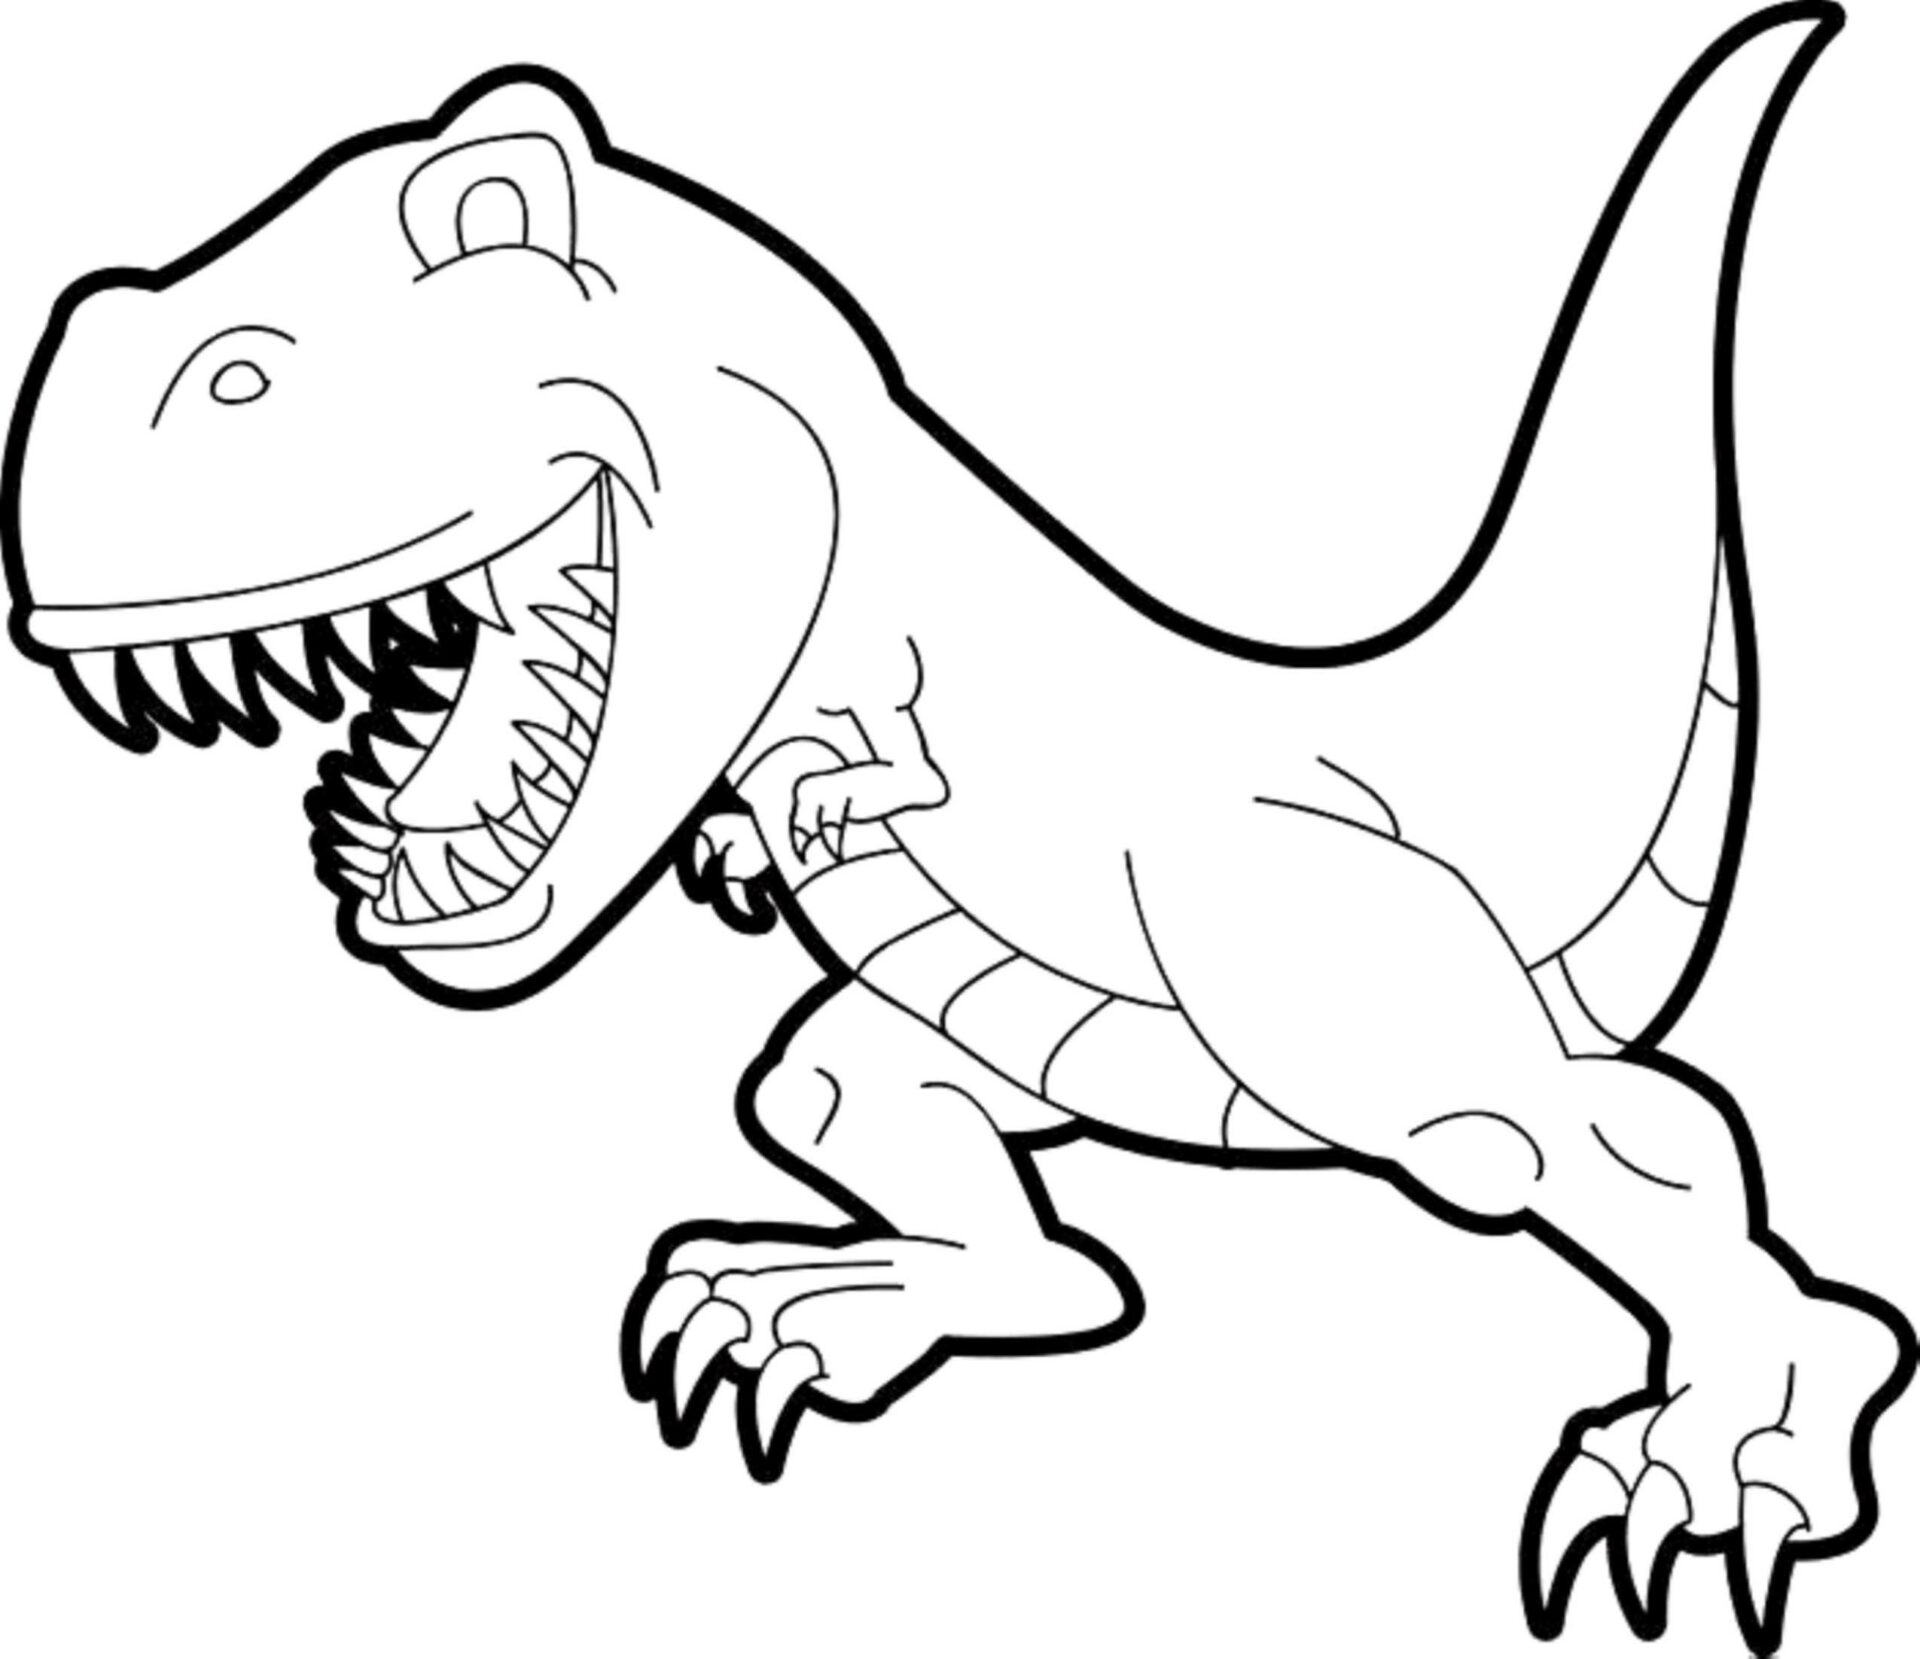 Smiling T Rex Coloring Page   Free Printable Coloring Pages for Kids